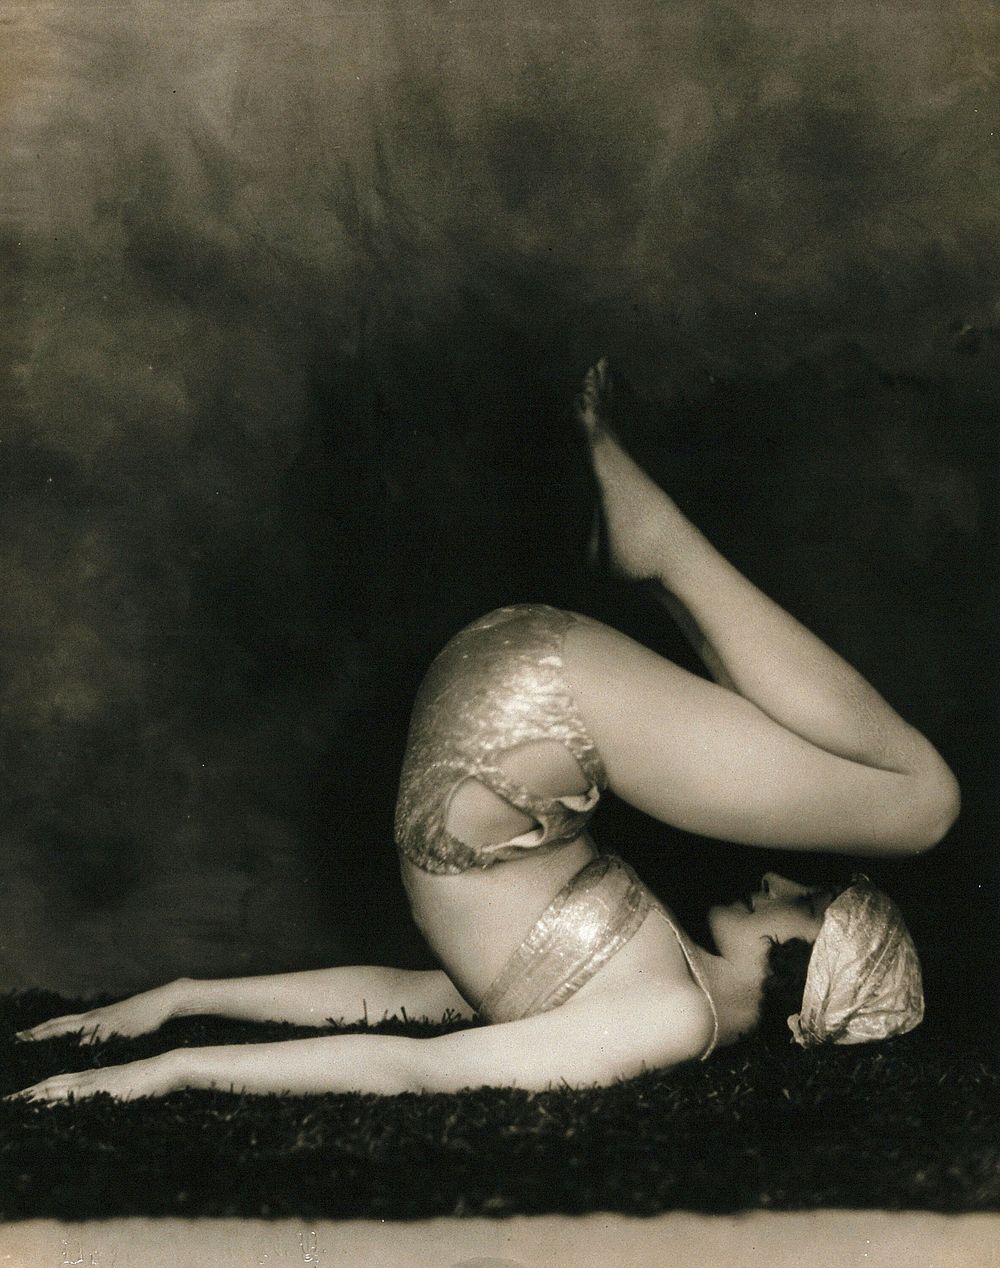 Marguerite Agniel posing with her back arched and feet in the air, wearing a two-piece costume and matching turban.